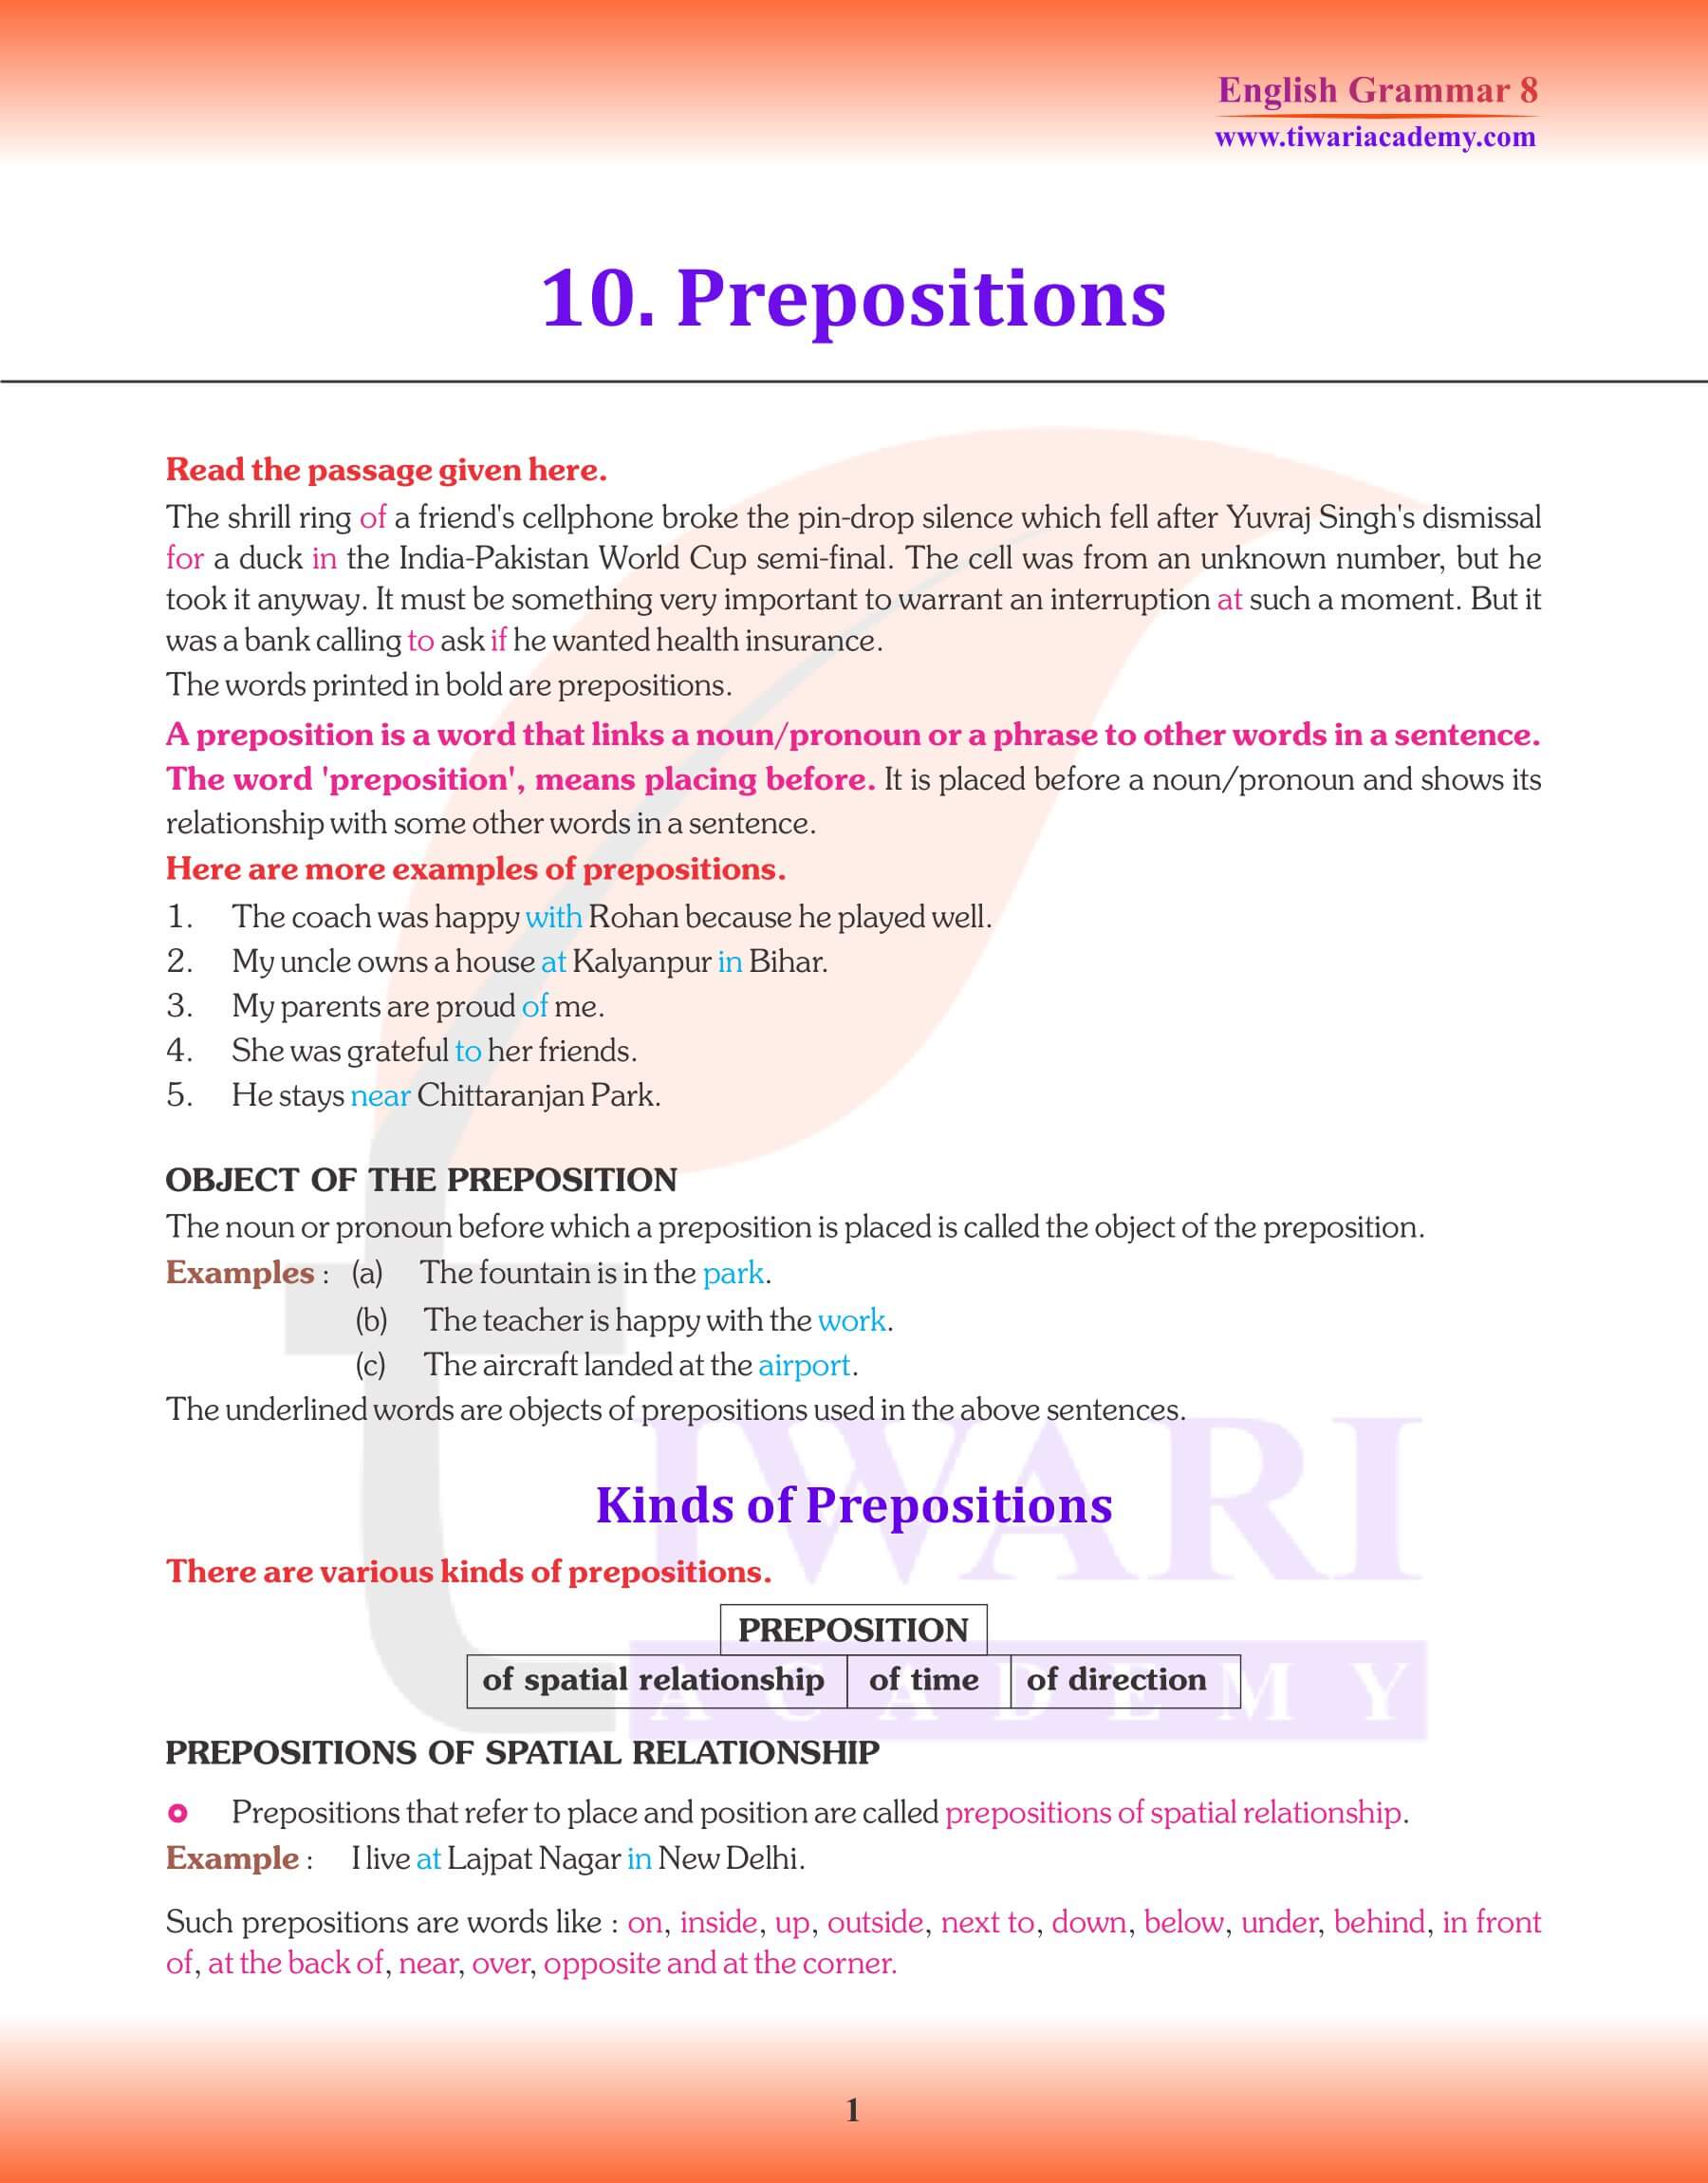 Class 8 English Grammar Chapter 10 The Preposition Revision book